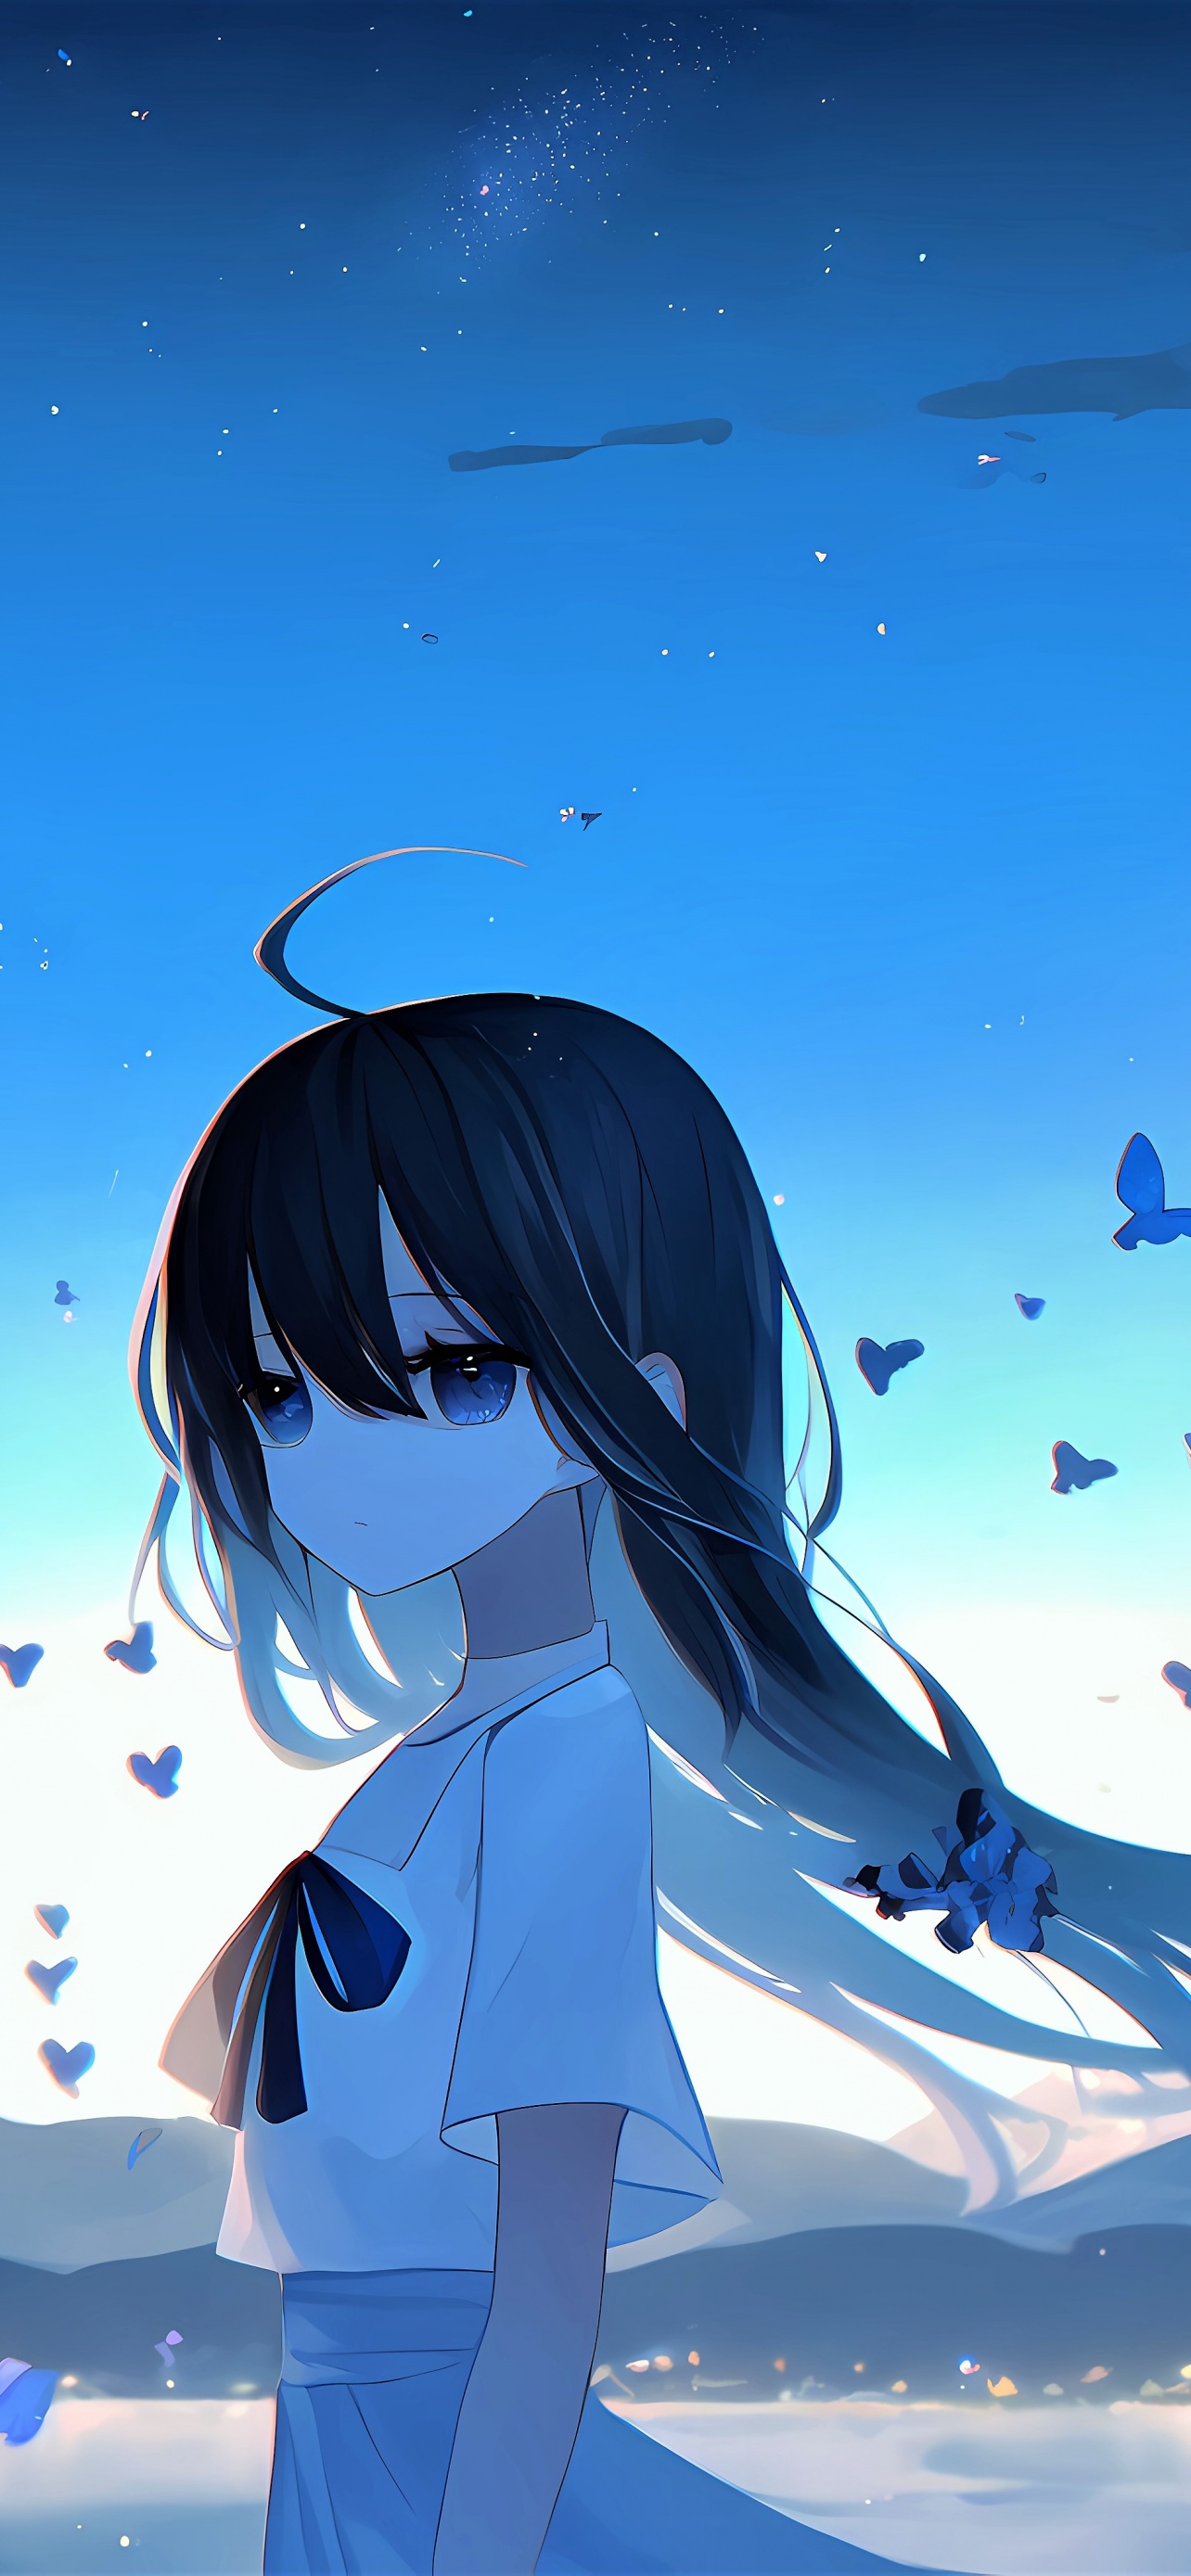 Sad Anime HD Wallpapers 1000 Free Sad Anime Wallpaper Images For All  Devices